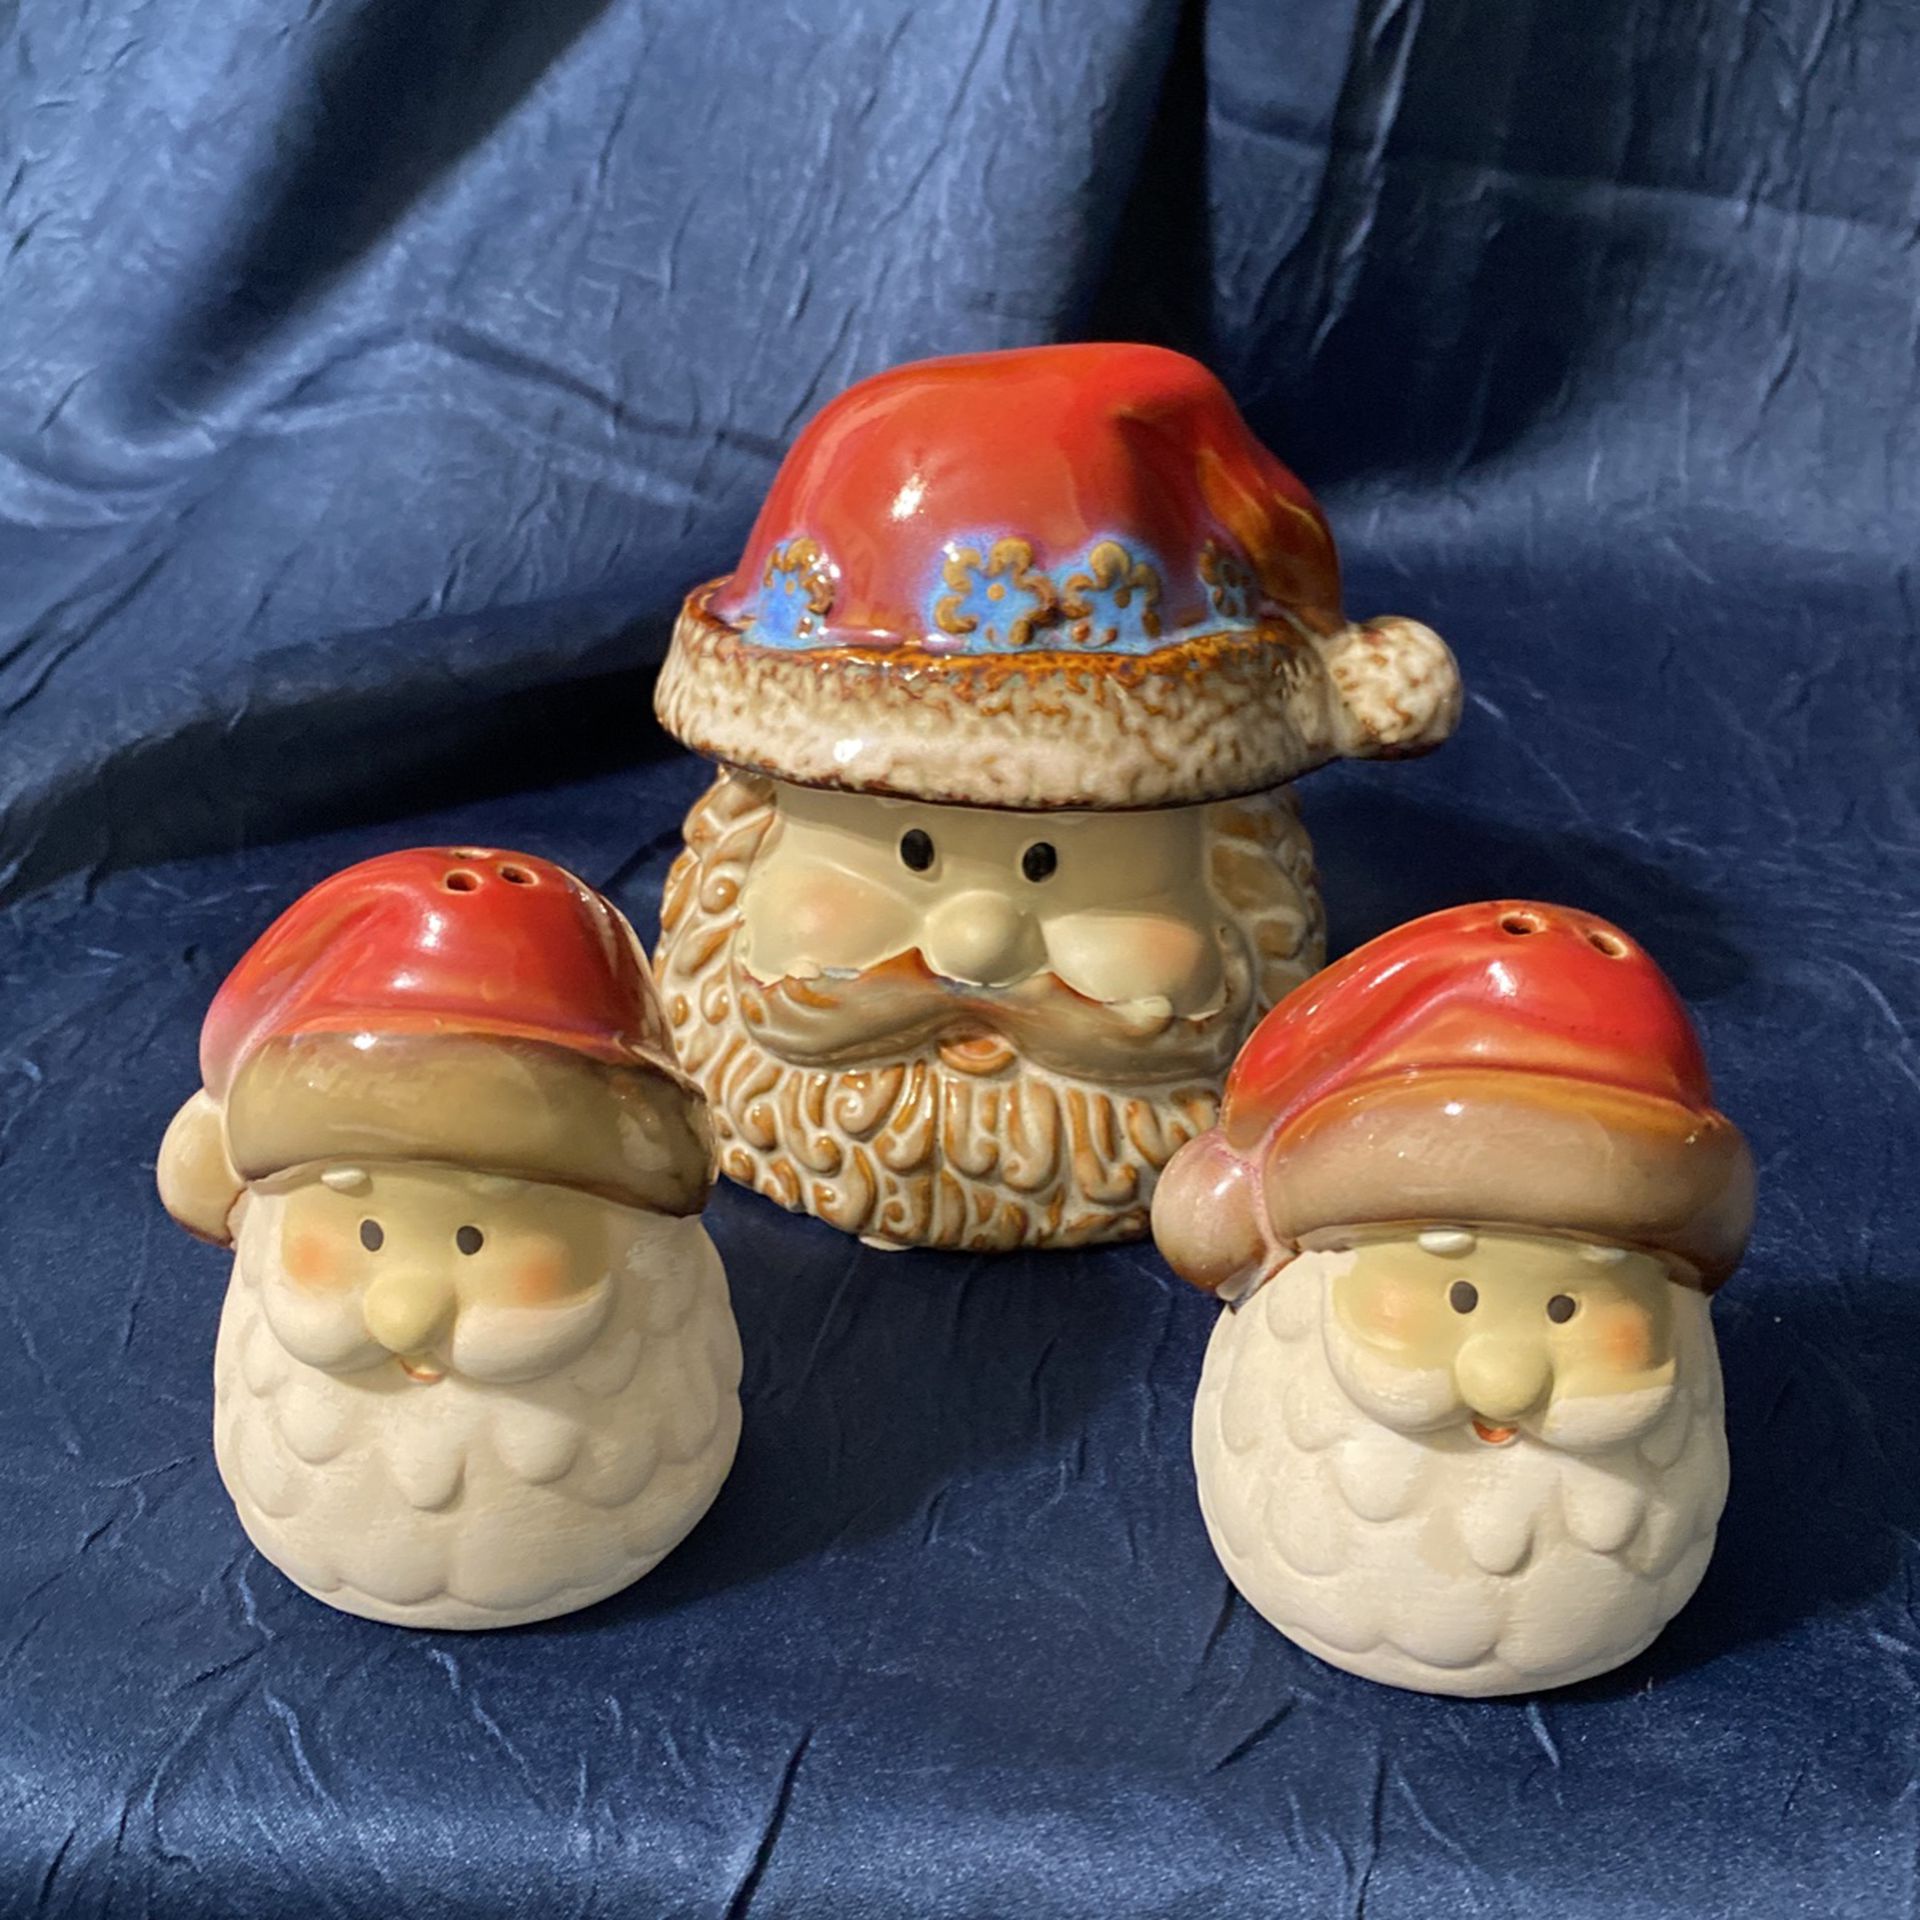 (3) Pieces Santa Clause Salt & Pepper Shakers and Santa Head Votive Candle Holder.